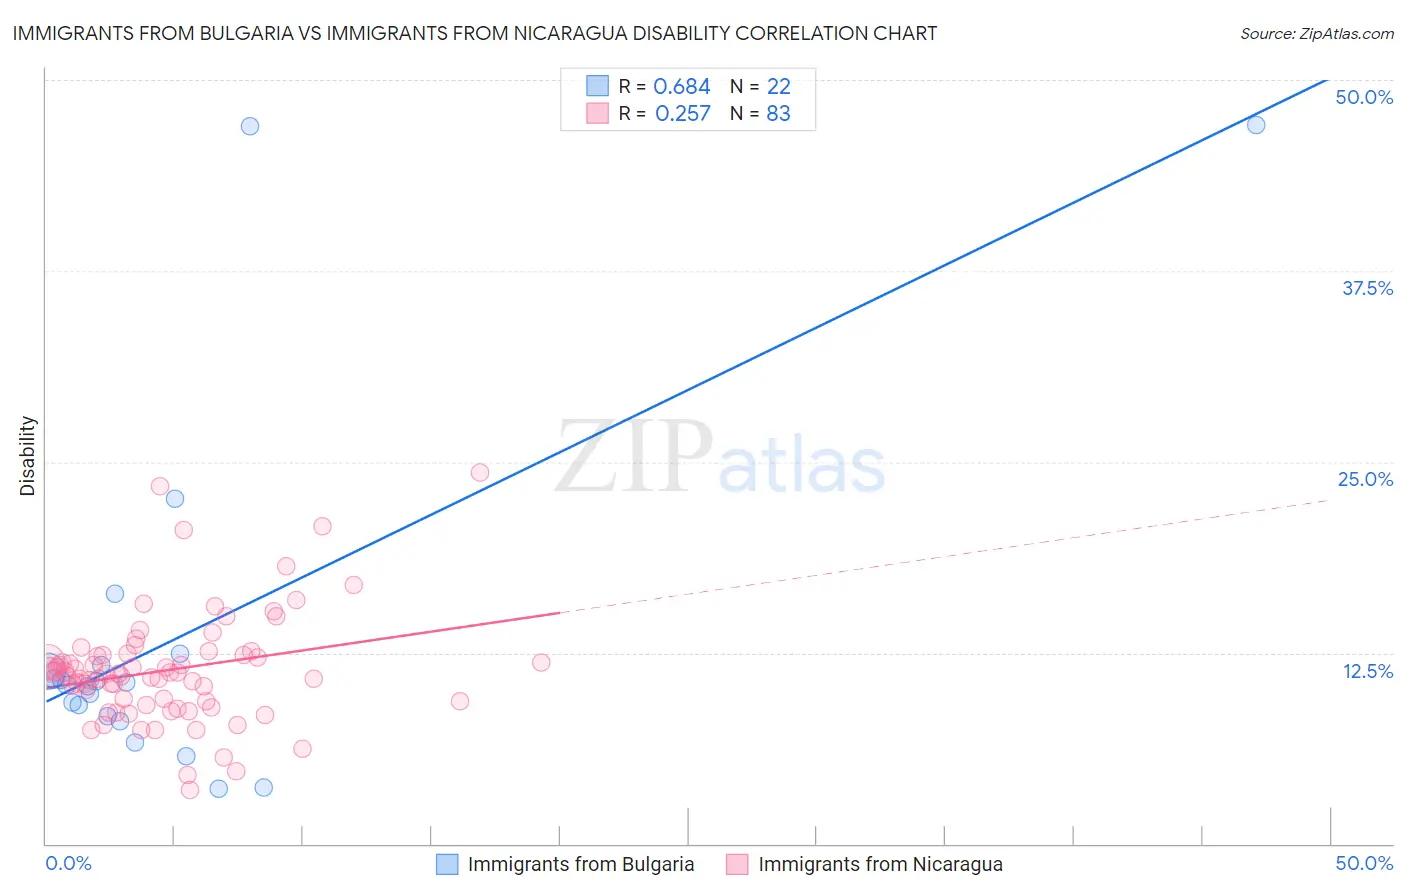 Immigrants from Bulgaria vs Immigrants from Nicaragua Disability